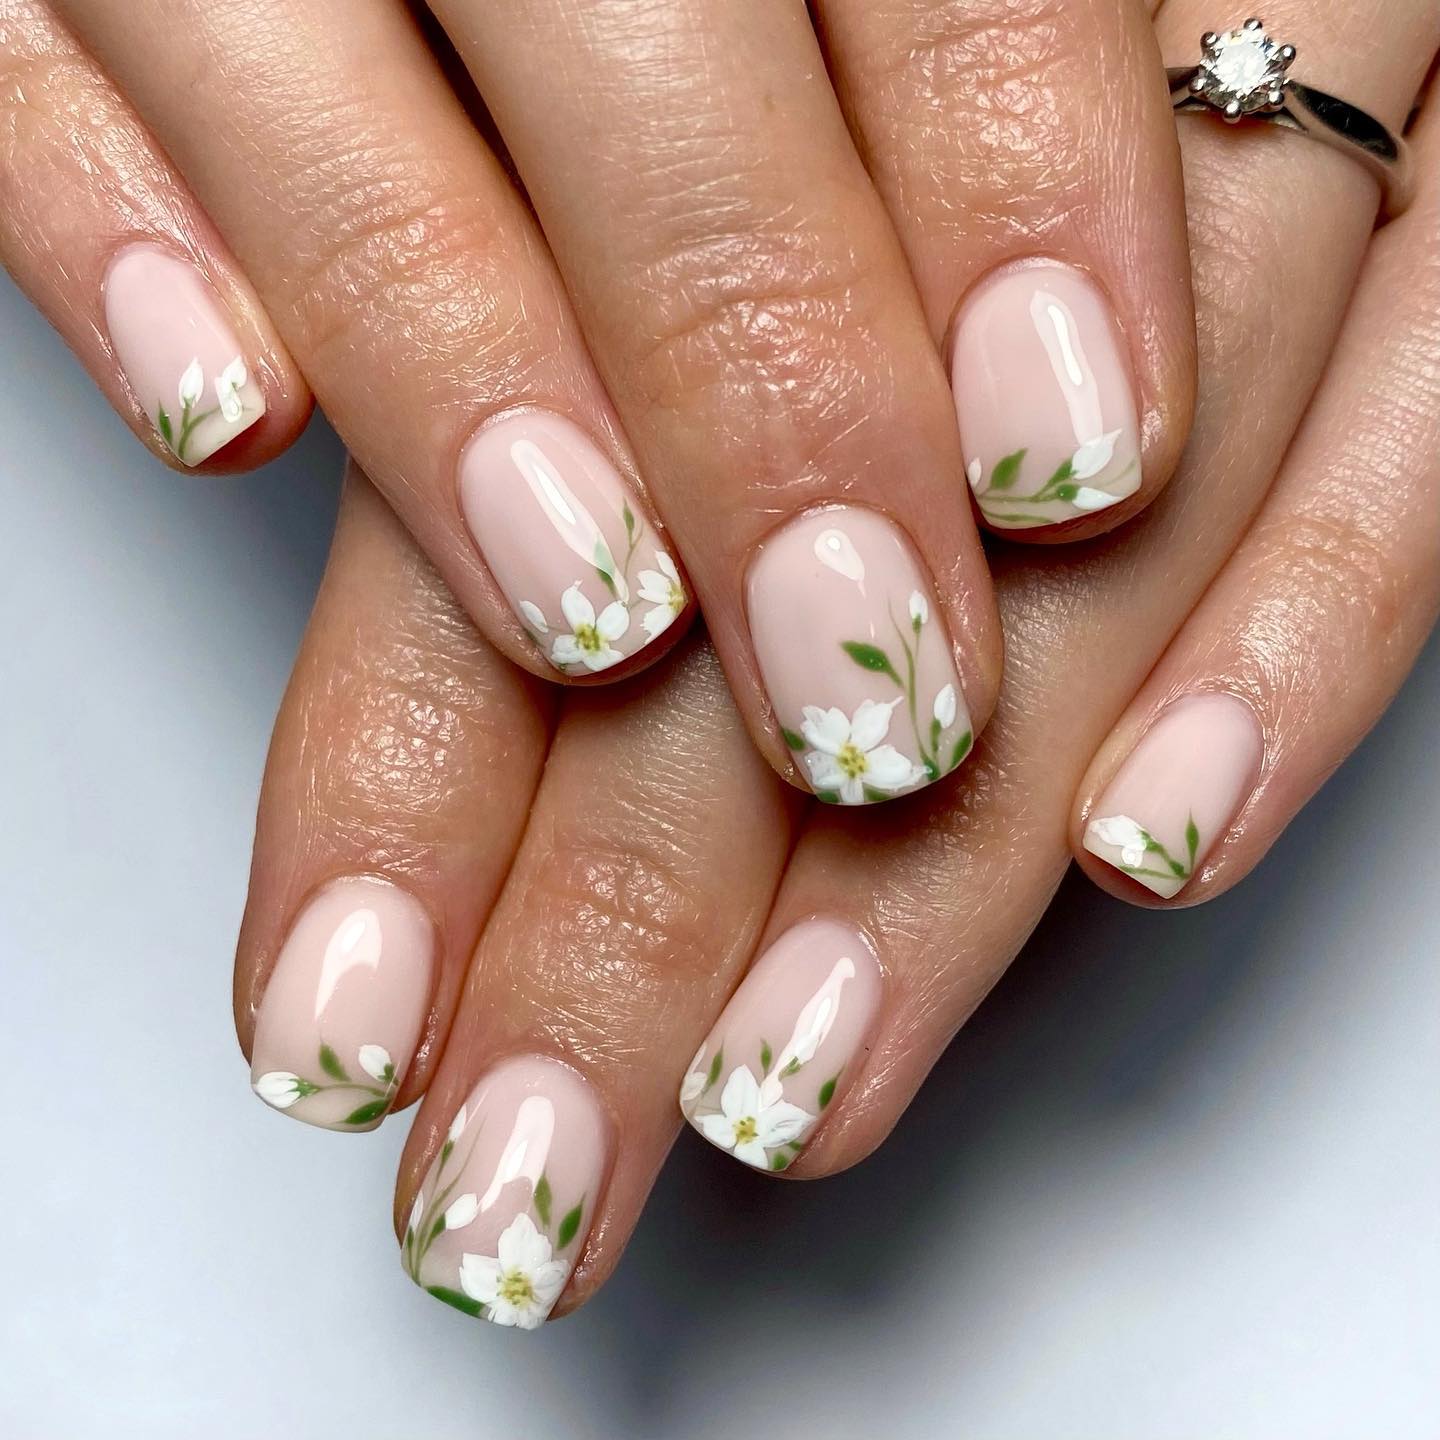 Those who like applying floral nail designs should try these nails out. As a bride, show your innocence with white flowers. The best thing about this design is that the flowers are placed on the tips. 